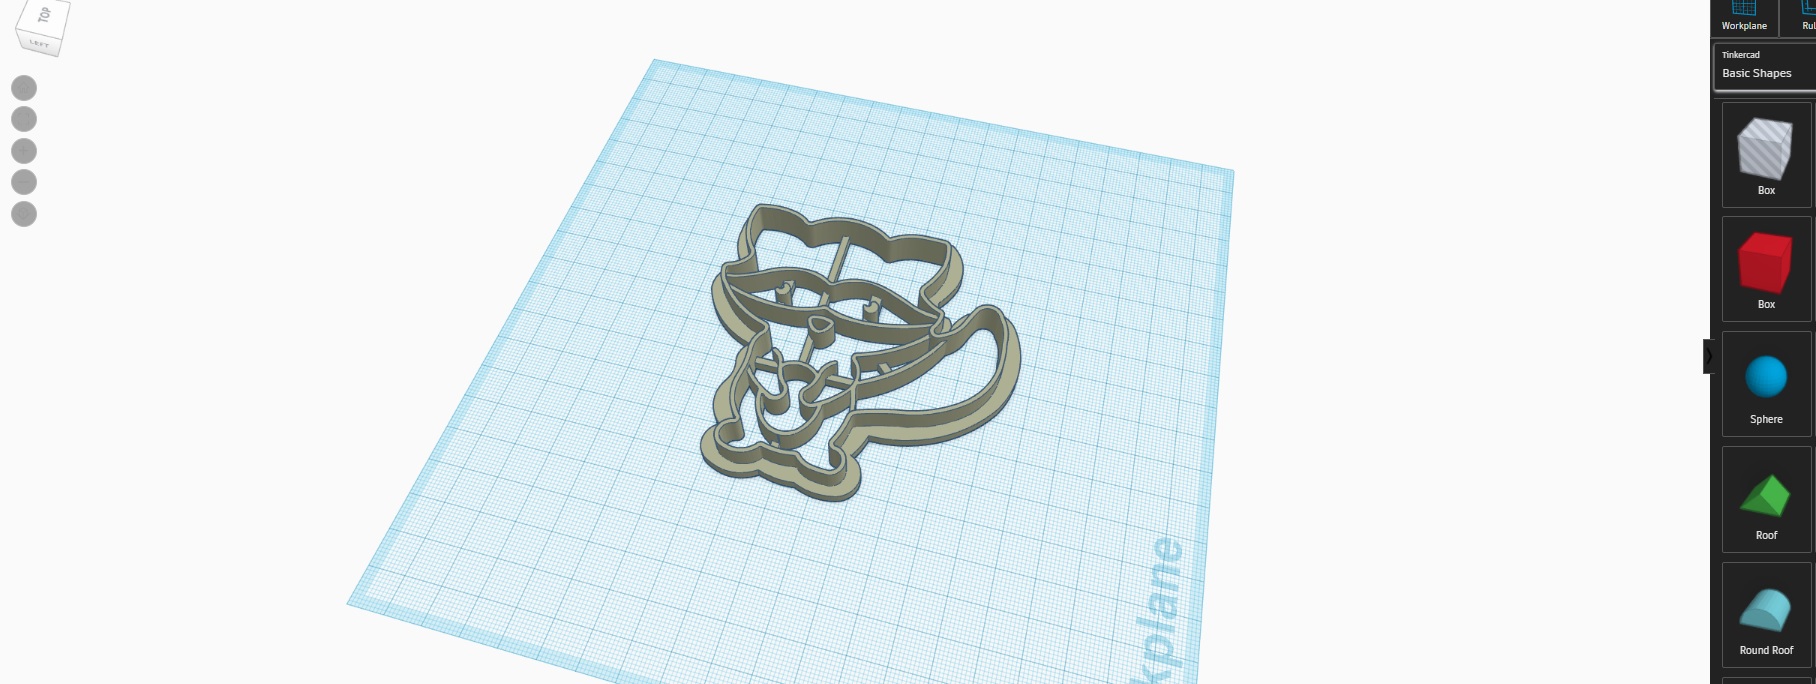 Tinkercad-racoon-cookie-cutter.jpg